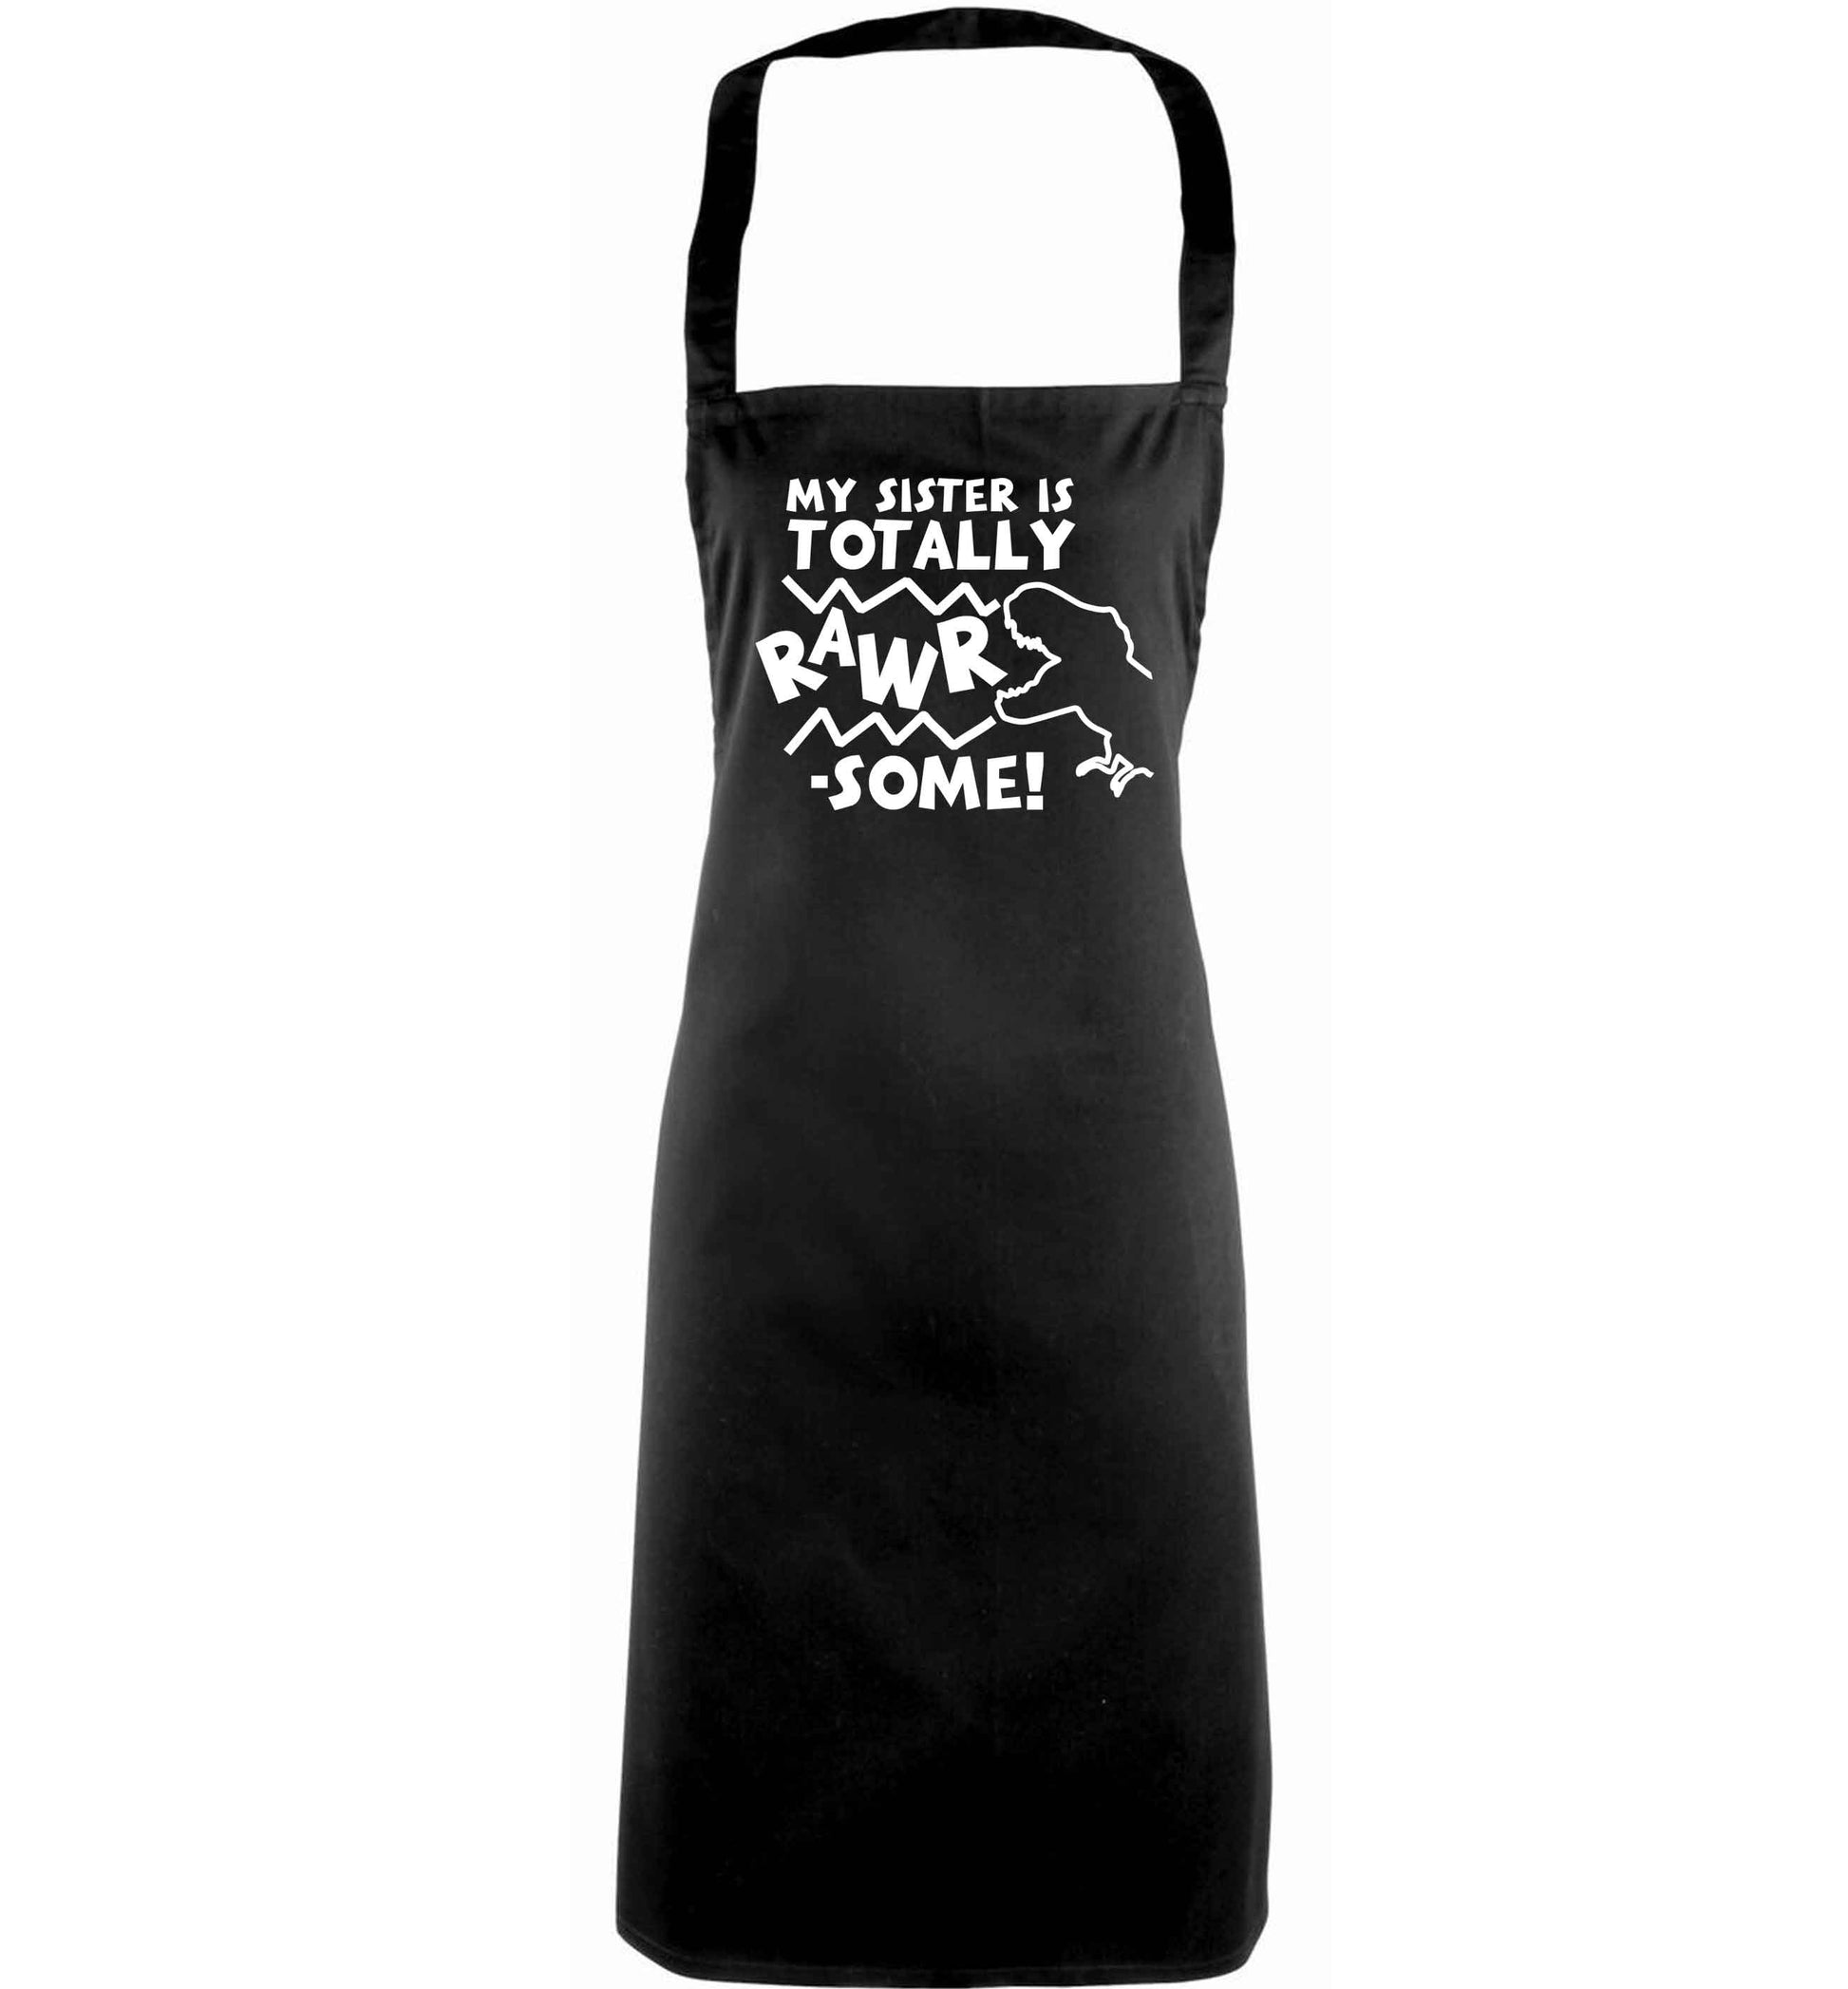 My sister is totally rawrsome adults black apron